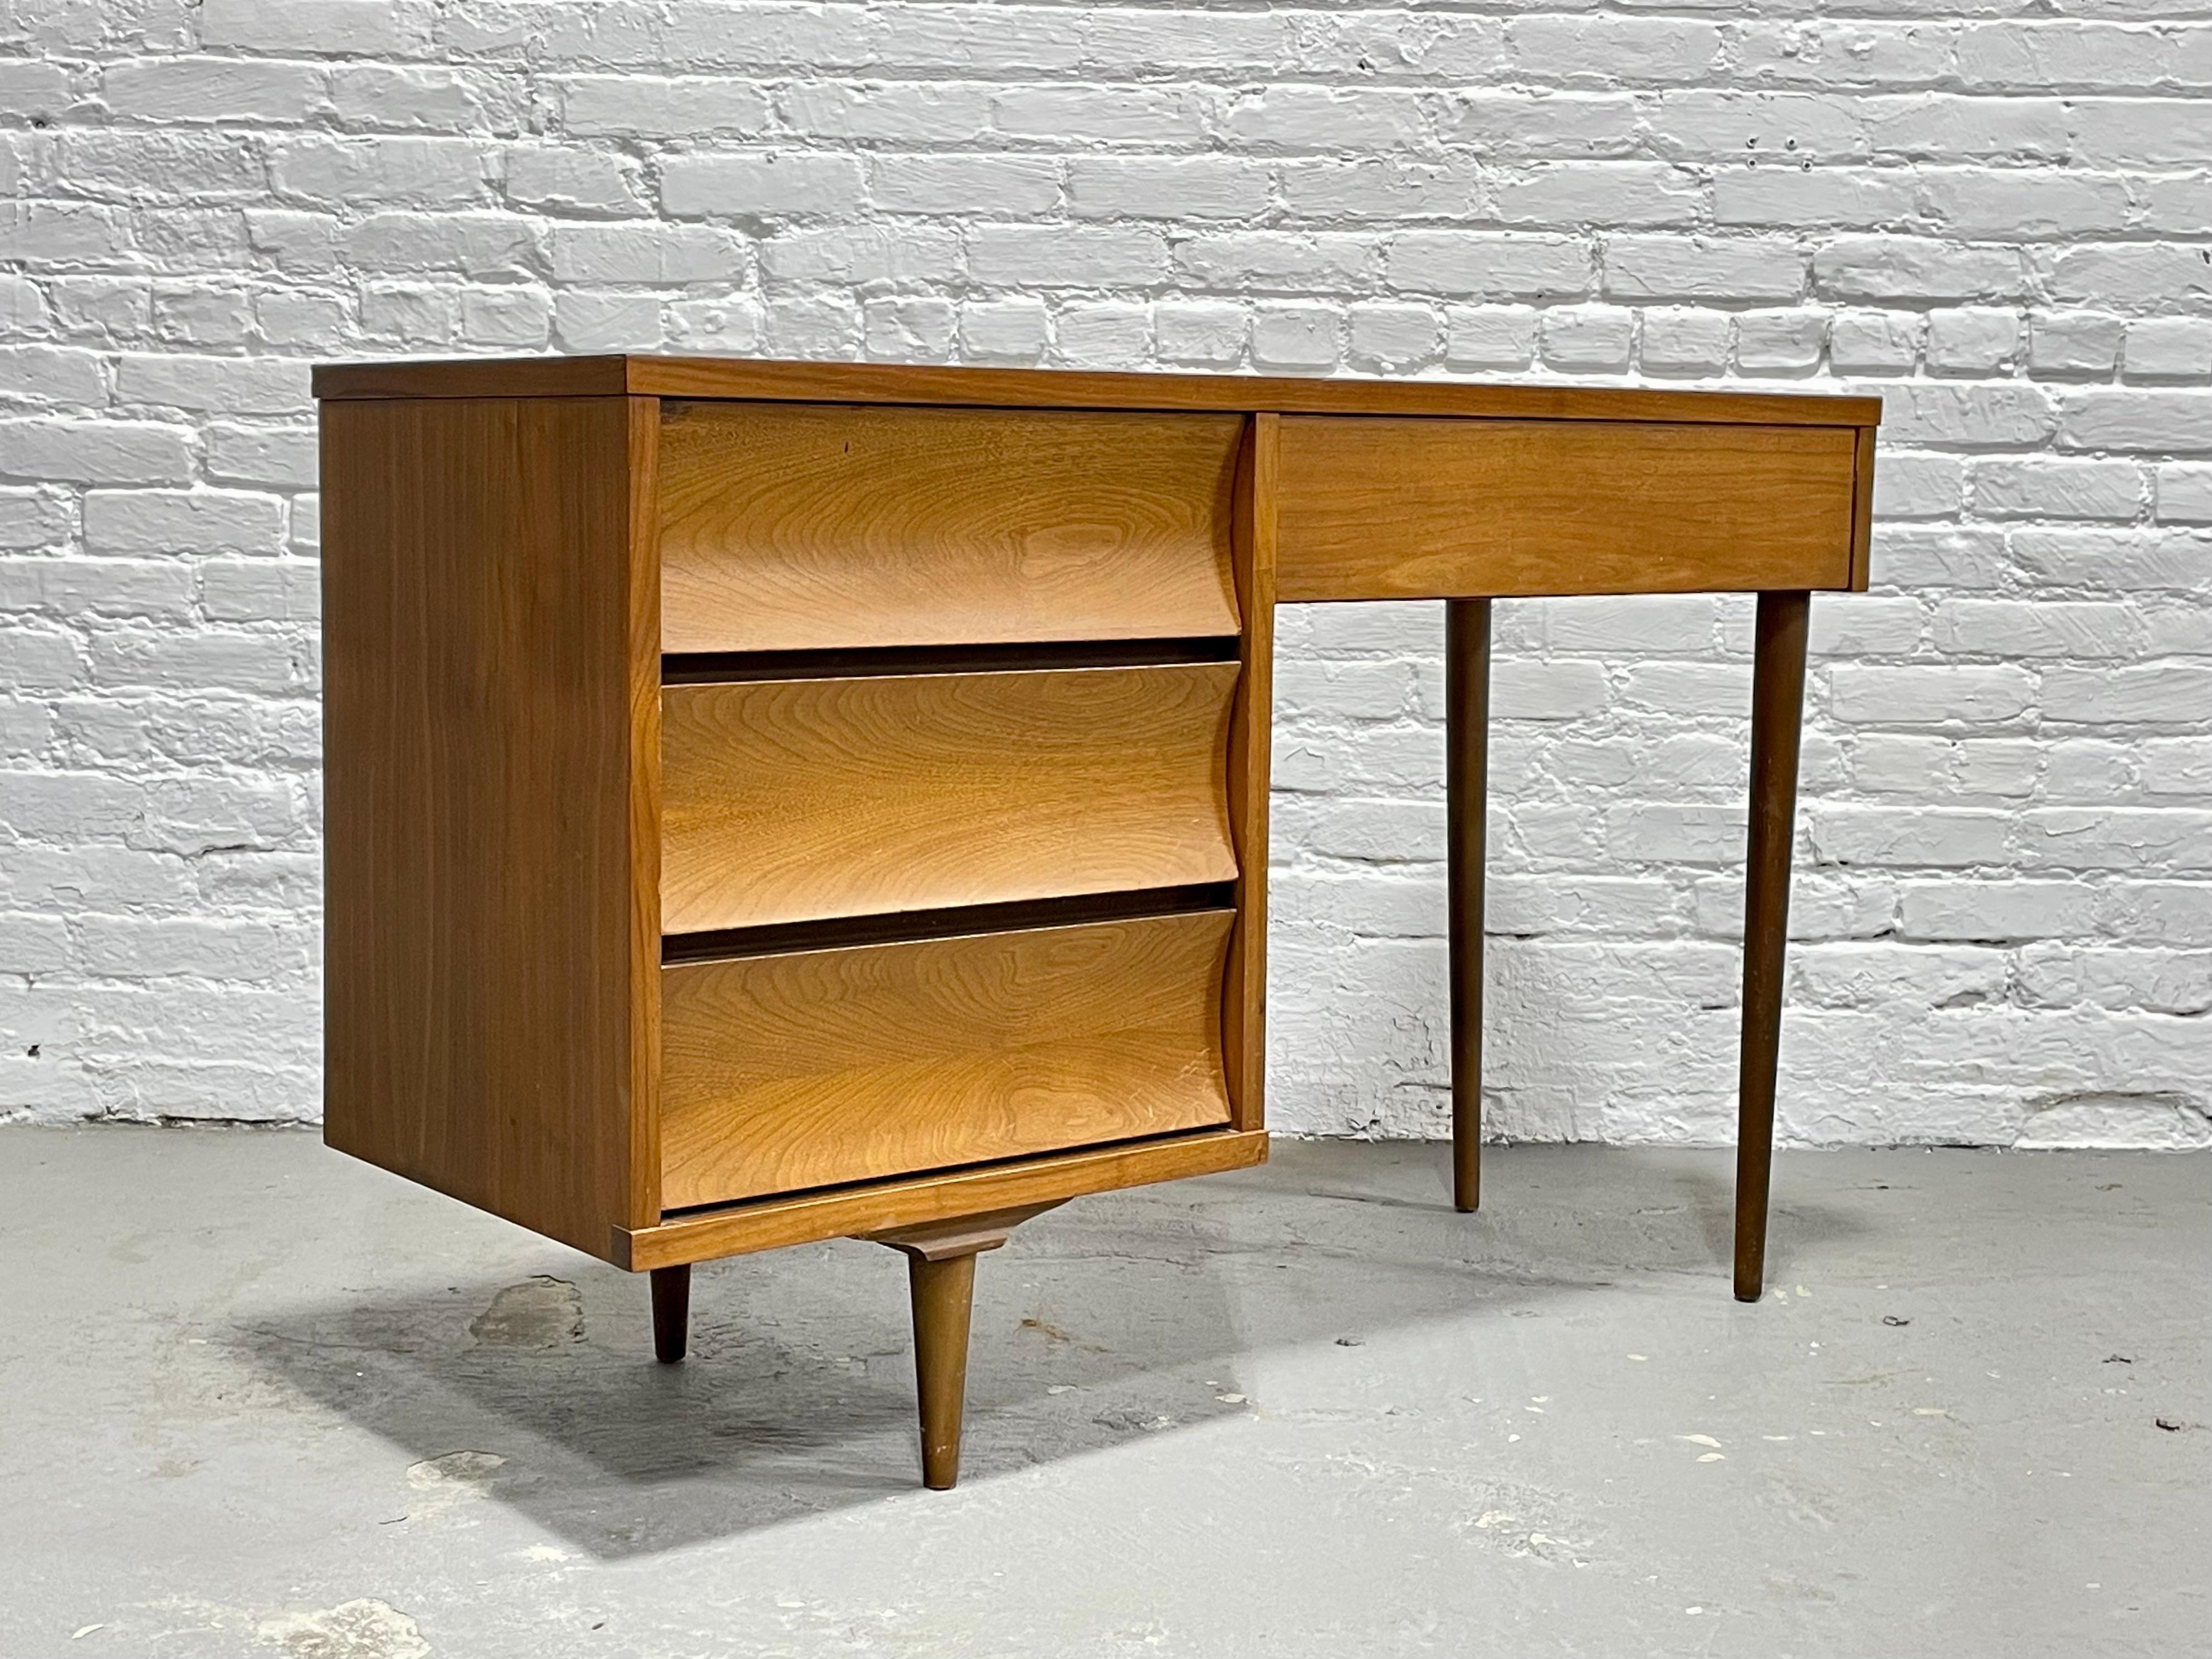 Mid Century Modern Walnut Desk by Johnson Carper, featuring concave drawers and four spacious drawers for plenty of storage space. The tabletop is a laminate (formica) woodgrain, perfect for withstanding the wear and tear of a work surface. This